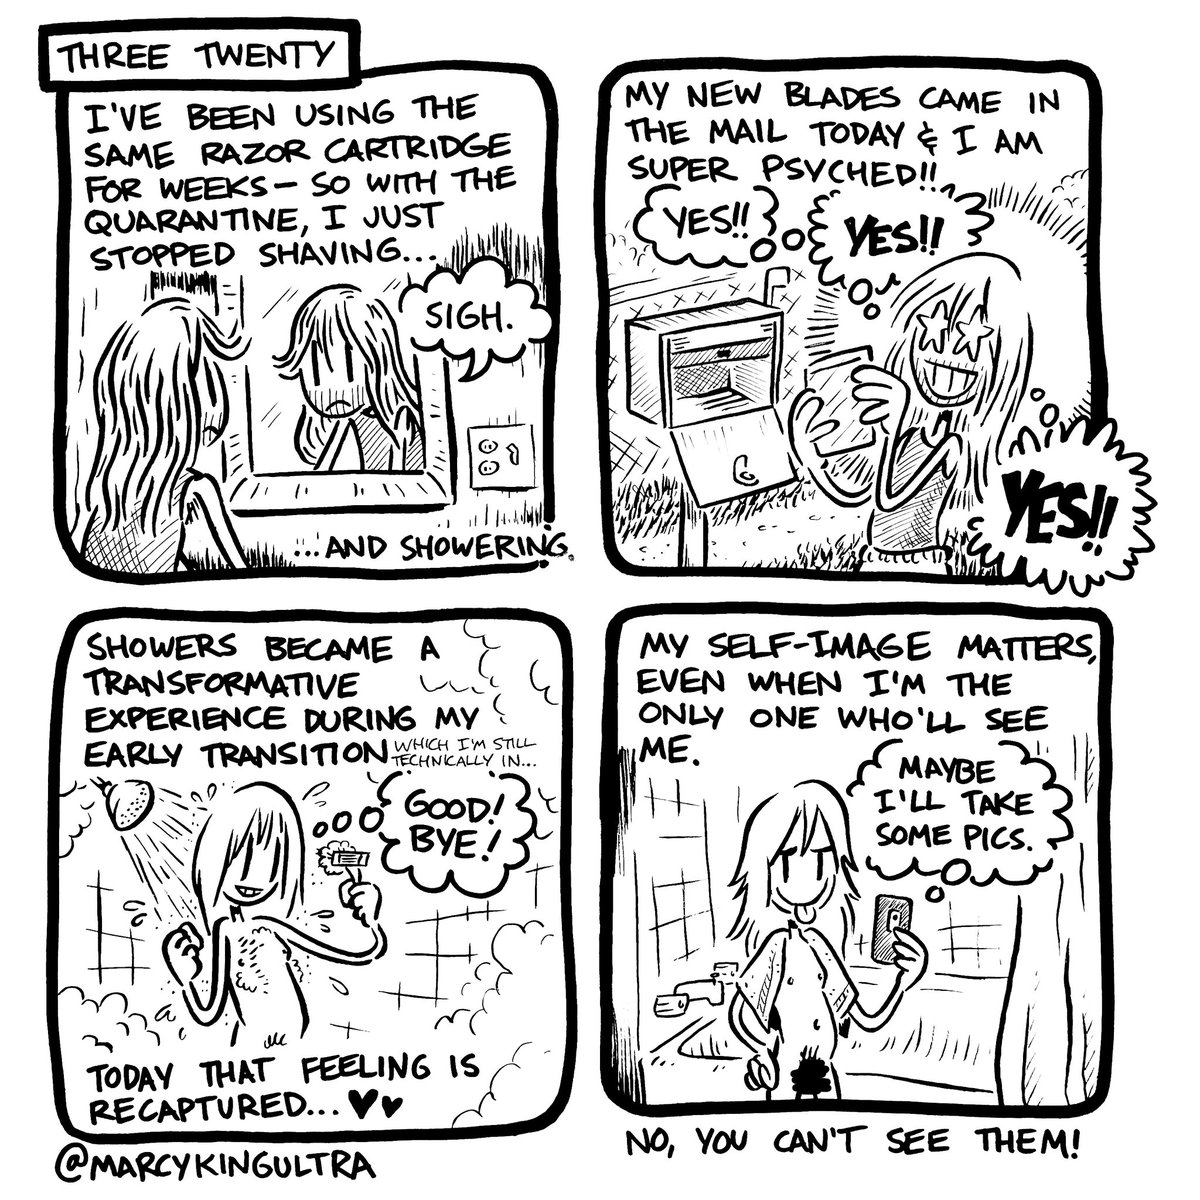 Rometwin Illustration God I Relate To This So Hard Especially When I Ve Been In Mental Slumps The Last Panel Totally Cements The Mentality I Ve Been Following Though My Self Image